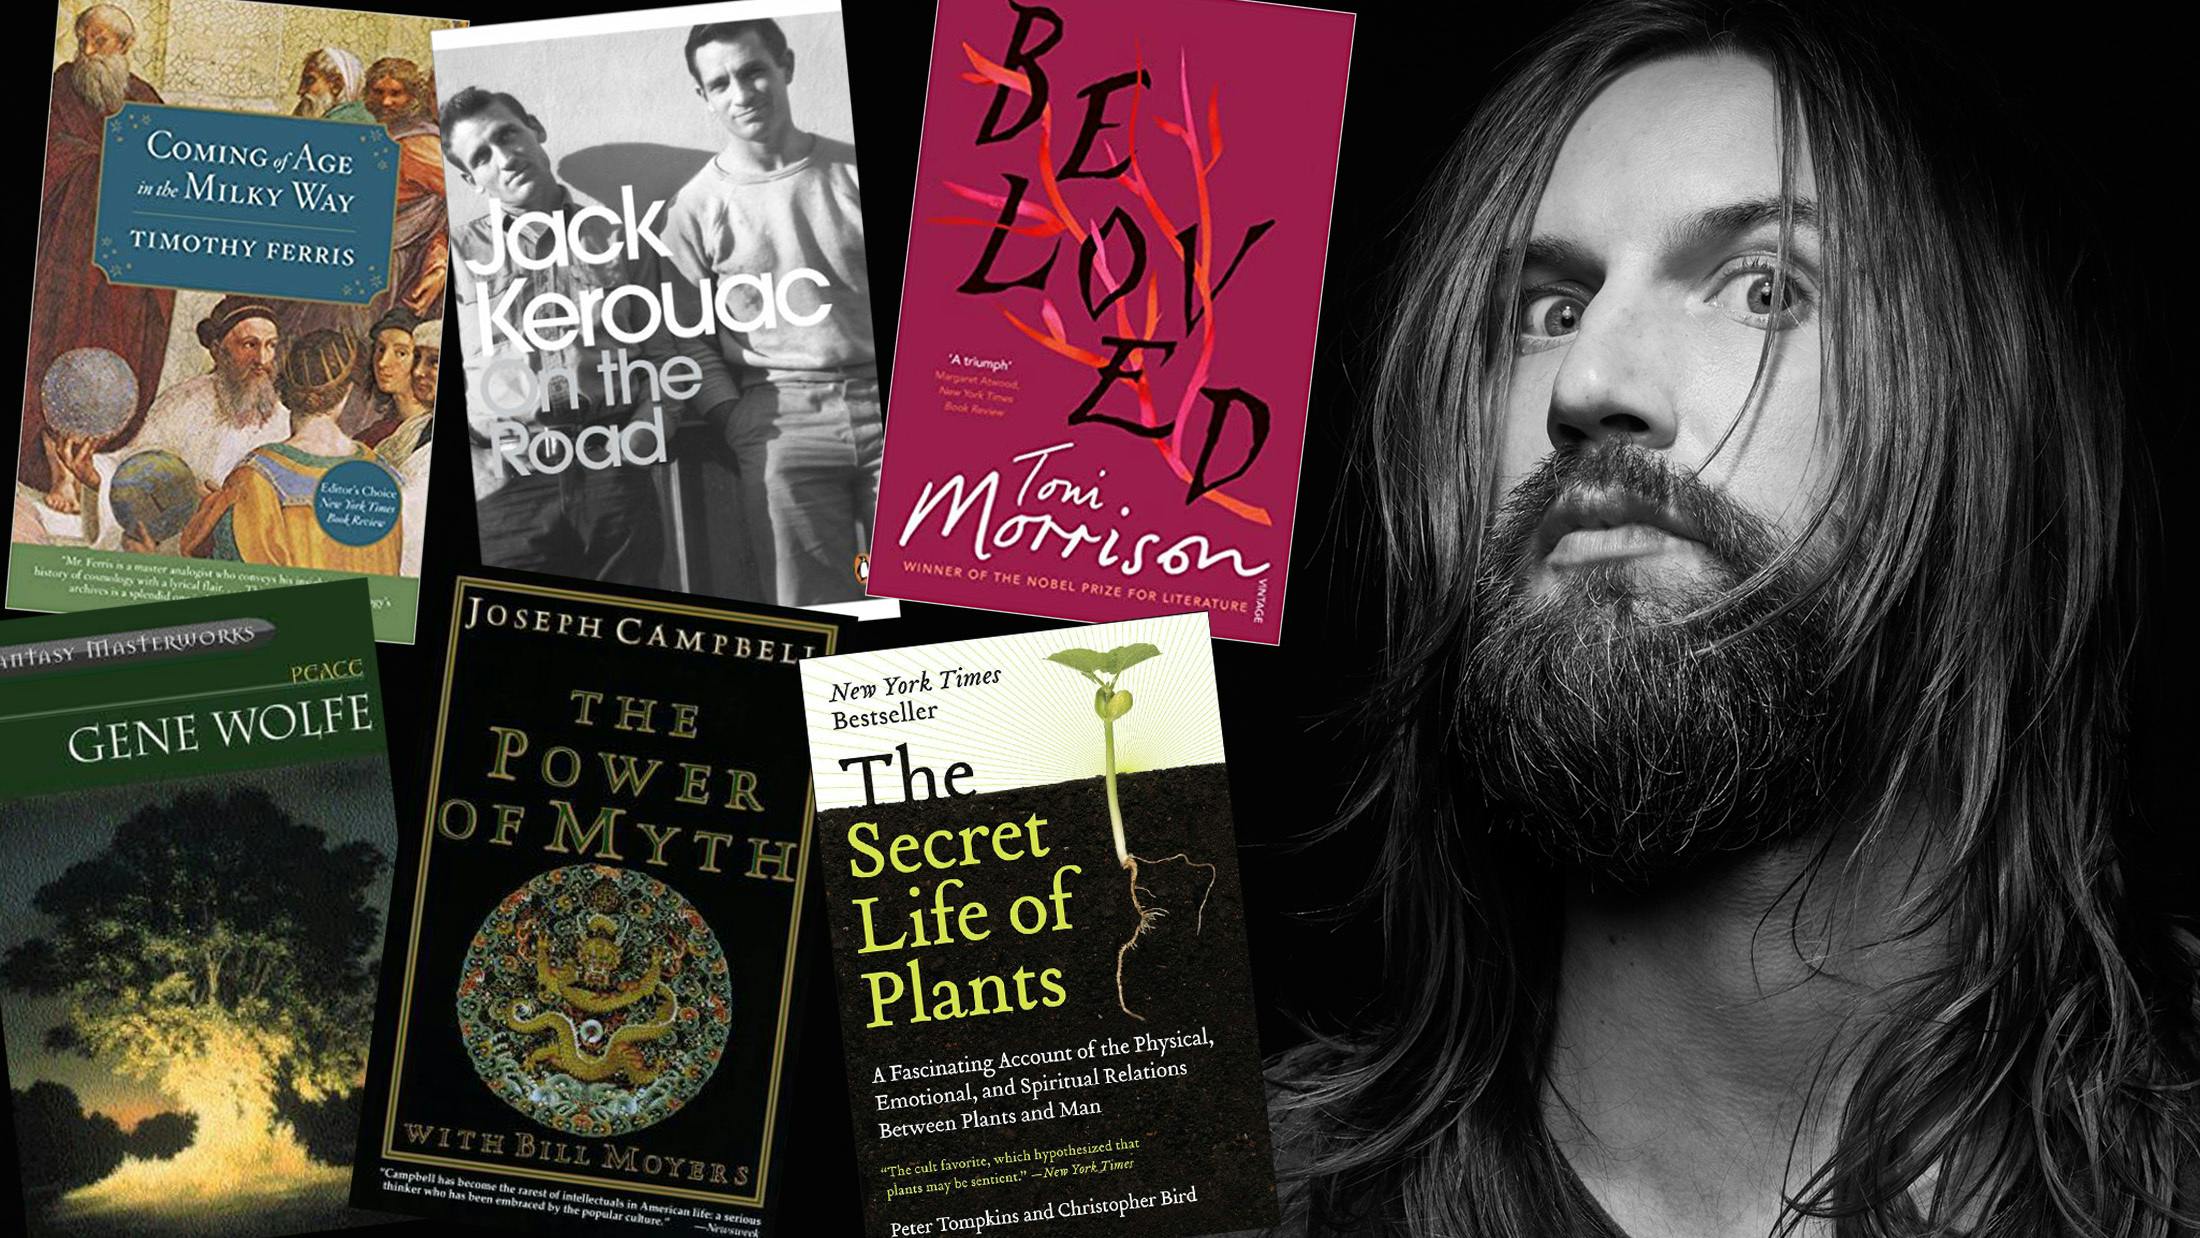 Keith Buckley: My Life In Books